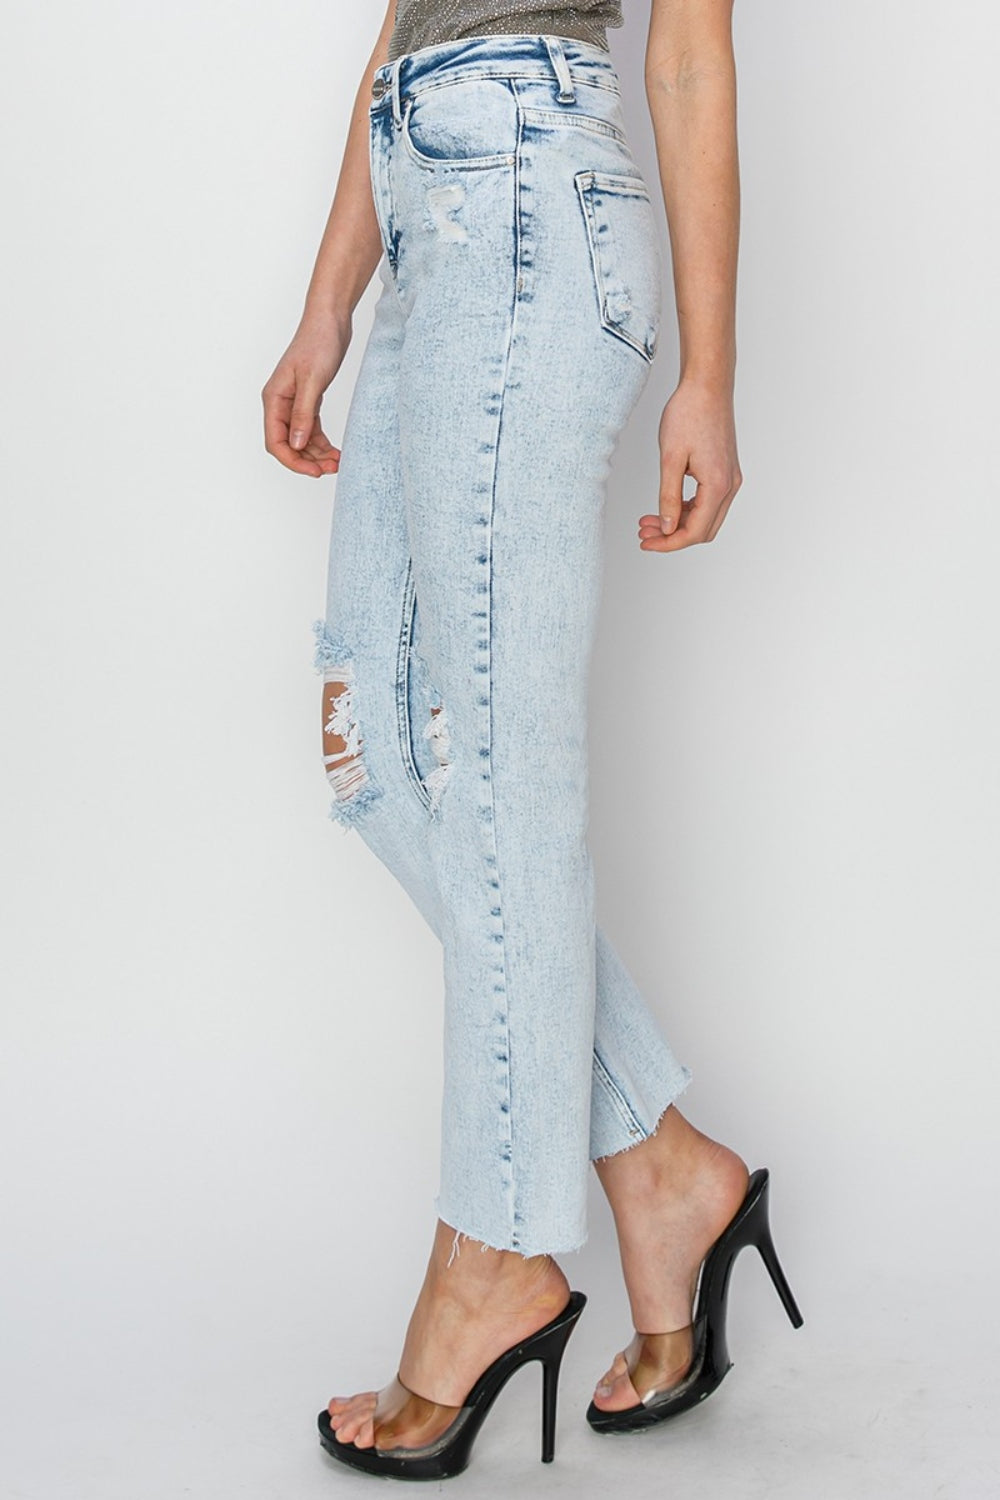 Dovepeak Ankle Jeans